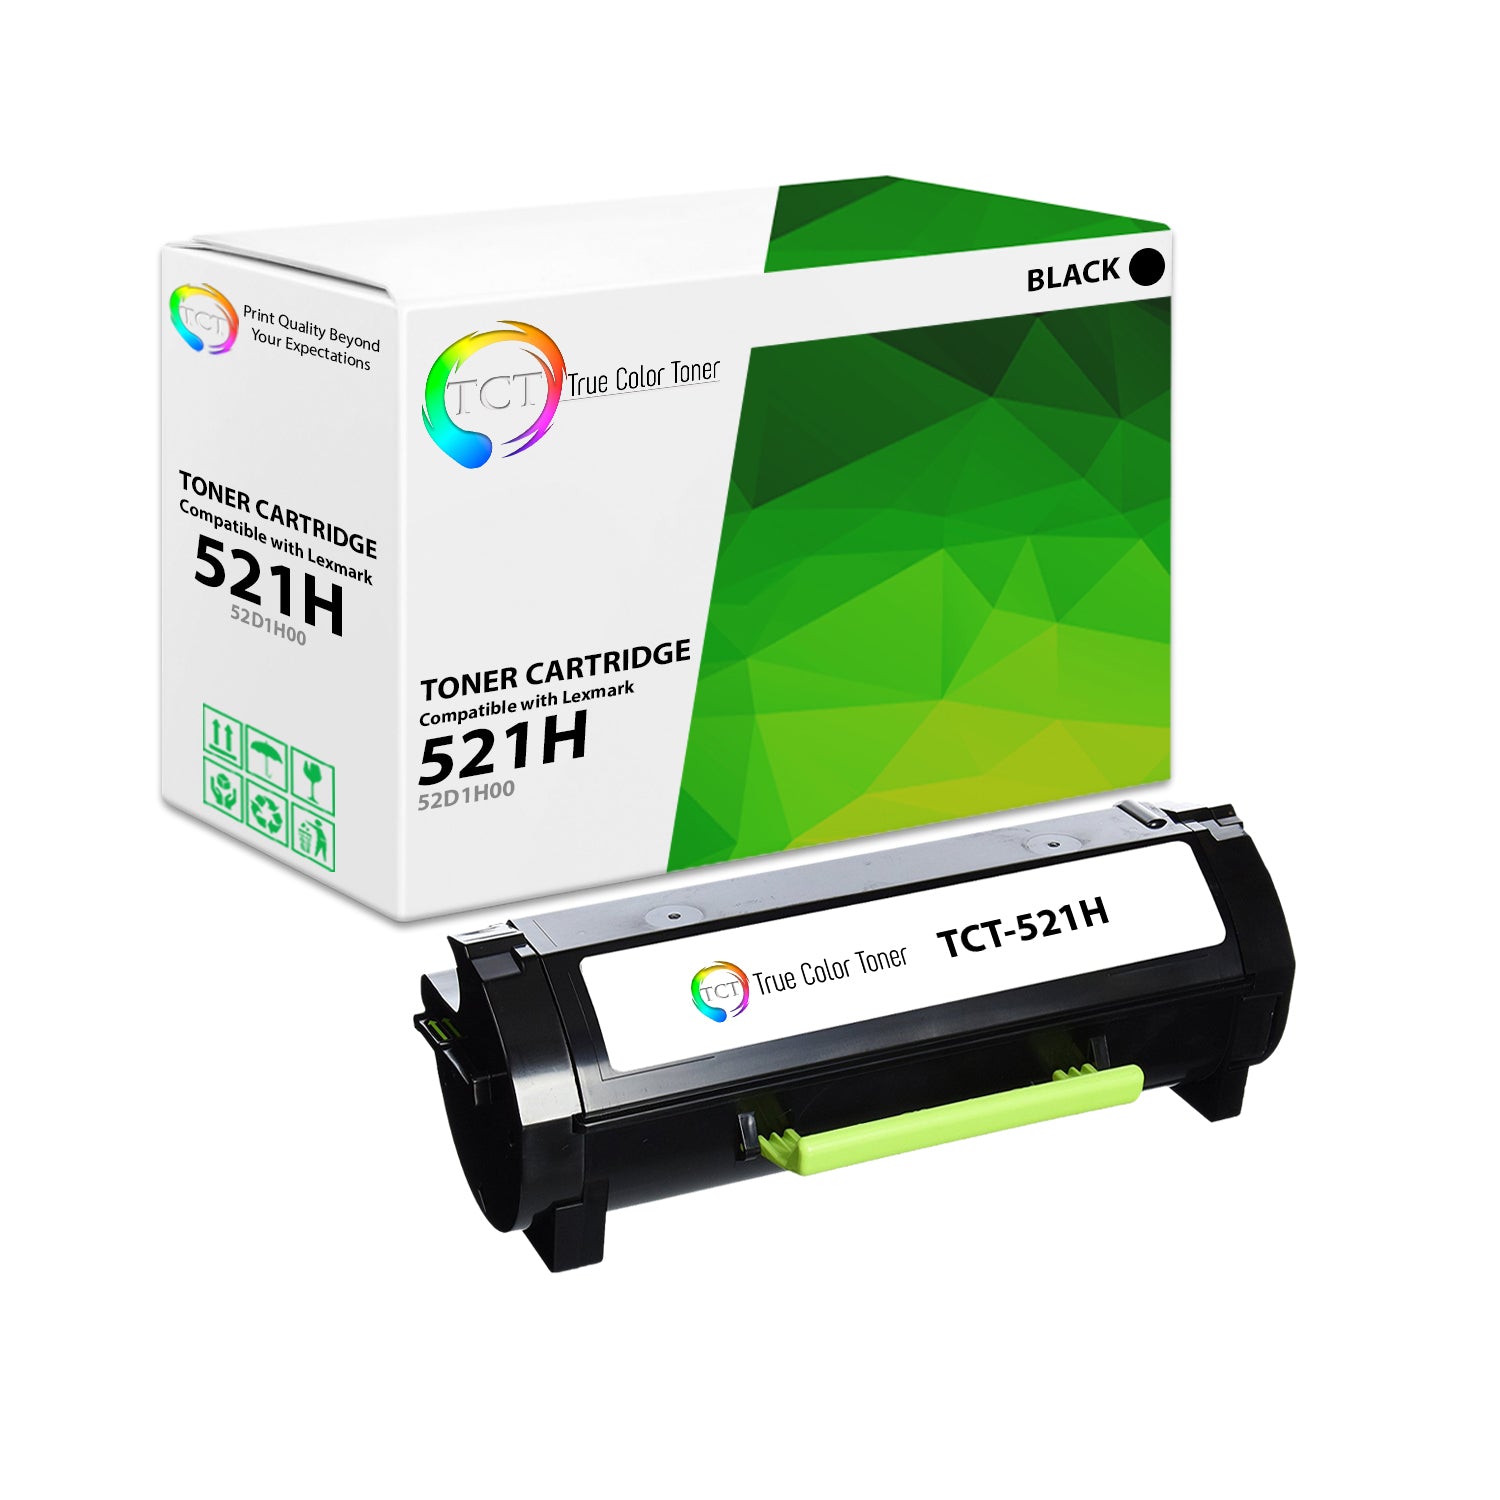 TCT Remanufactured High Yield Toner Cartridge Replacement for the Lexmark 521H Series - 1 Pack Black